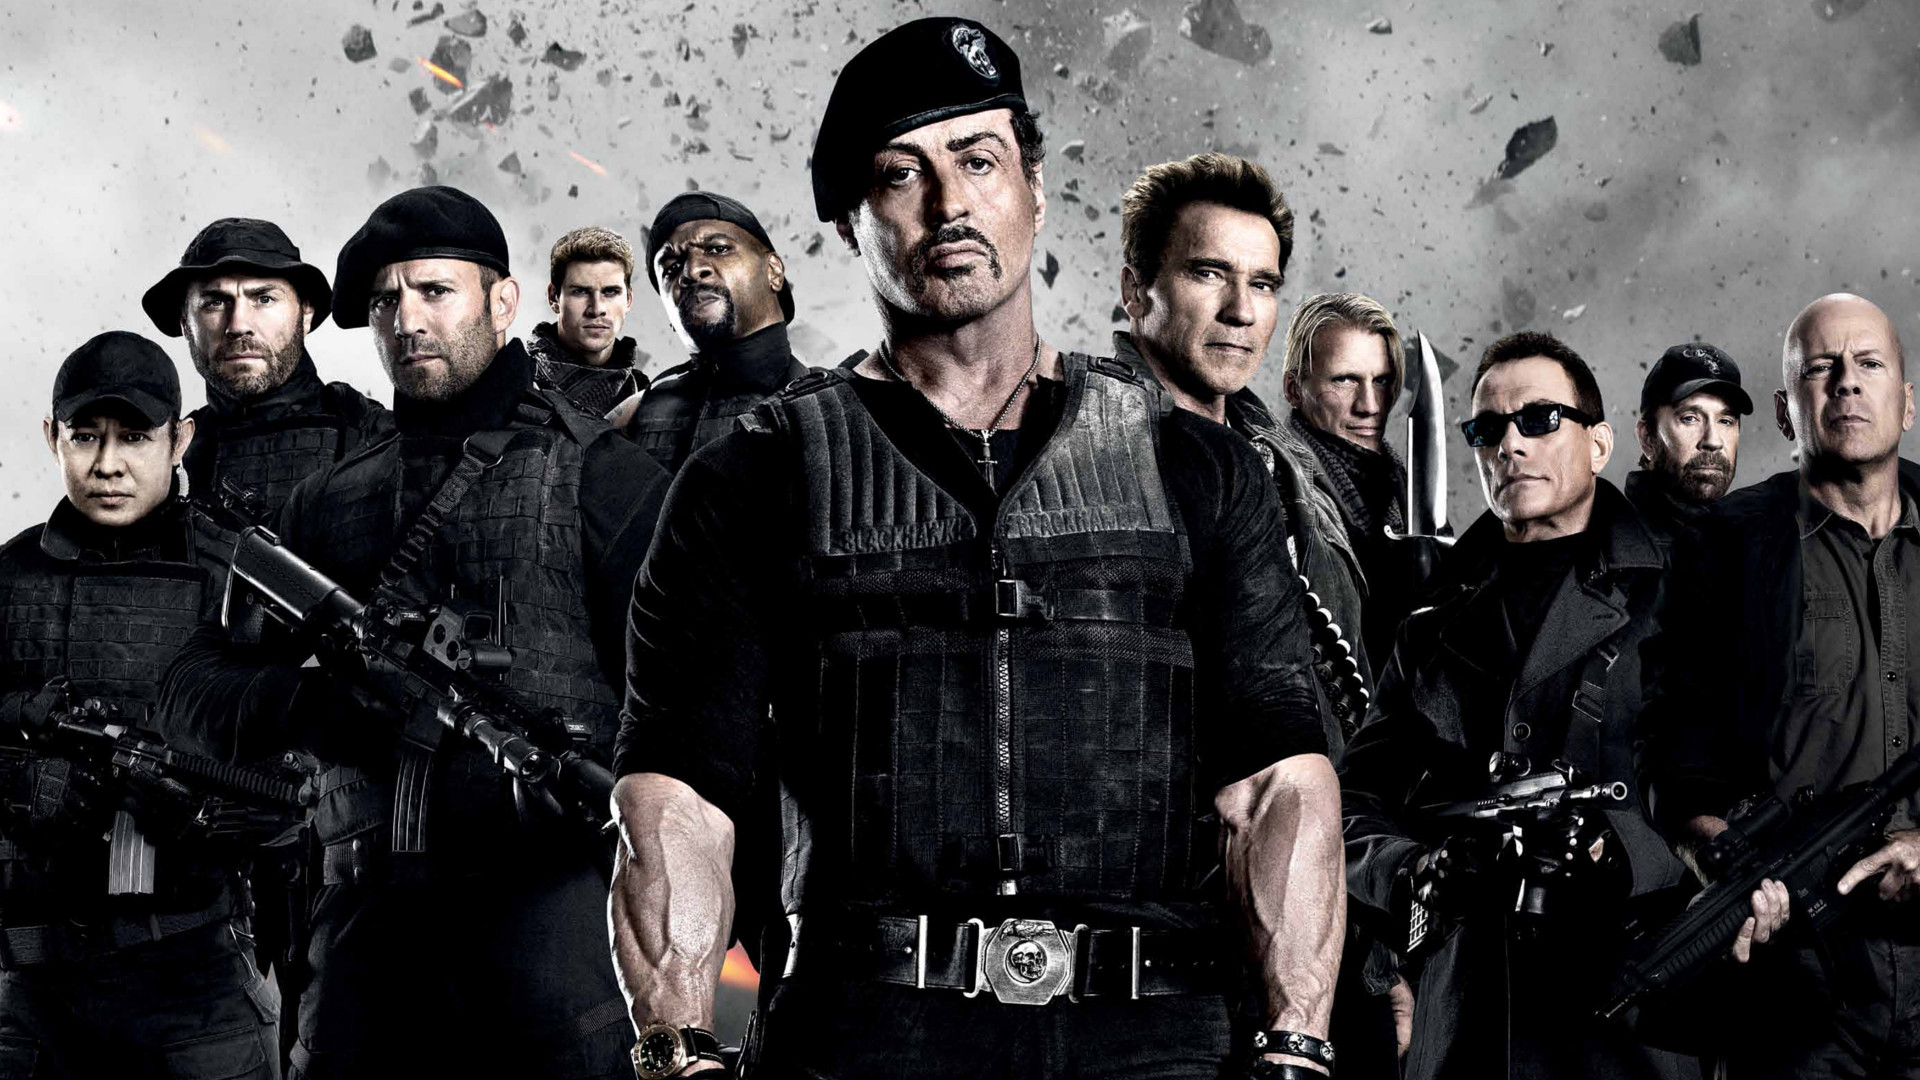 movie, the expendables 2, arnold schwarzenegger, barney ross, billy (the expendables), booker (the expendables), bruce willis, chuck norris, church (the expendables), dolph lundgren, gunnar jensen, hale caesar, jason statham, jean claude van damme, jet li, lee christmas, liam hemsworth, maggie (the expendables), randy couture, sylvester stallone, terry crews, toll road, trench (the expendables), vilain (the expendables), yin yang (the expendables), the expendables lock screen backgrounds